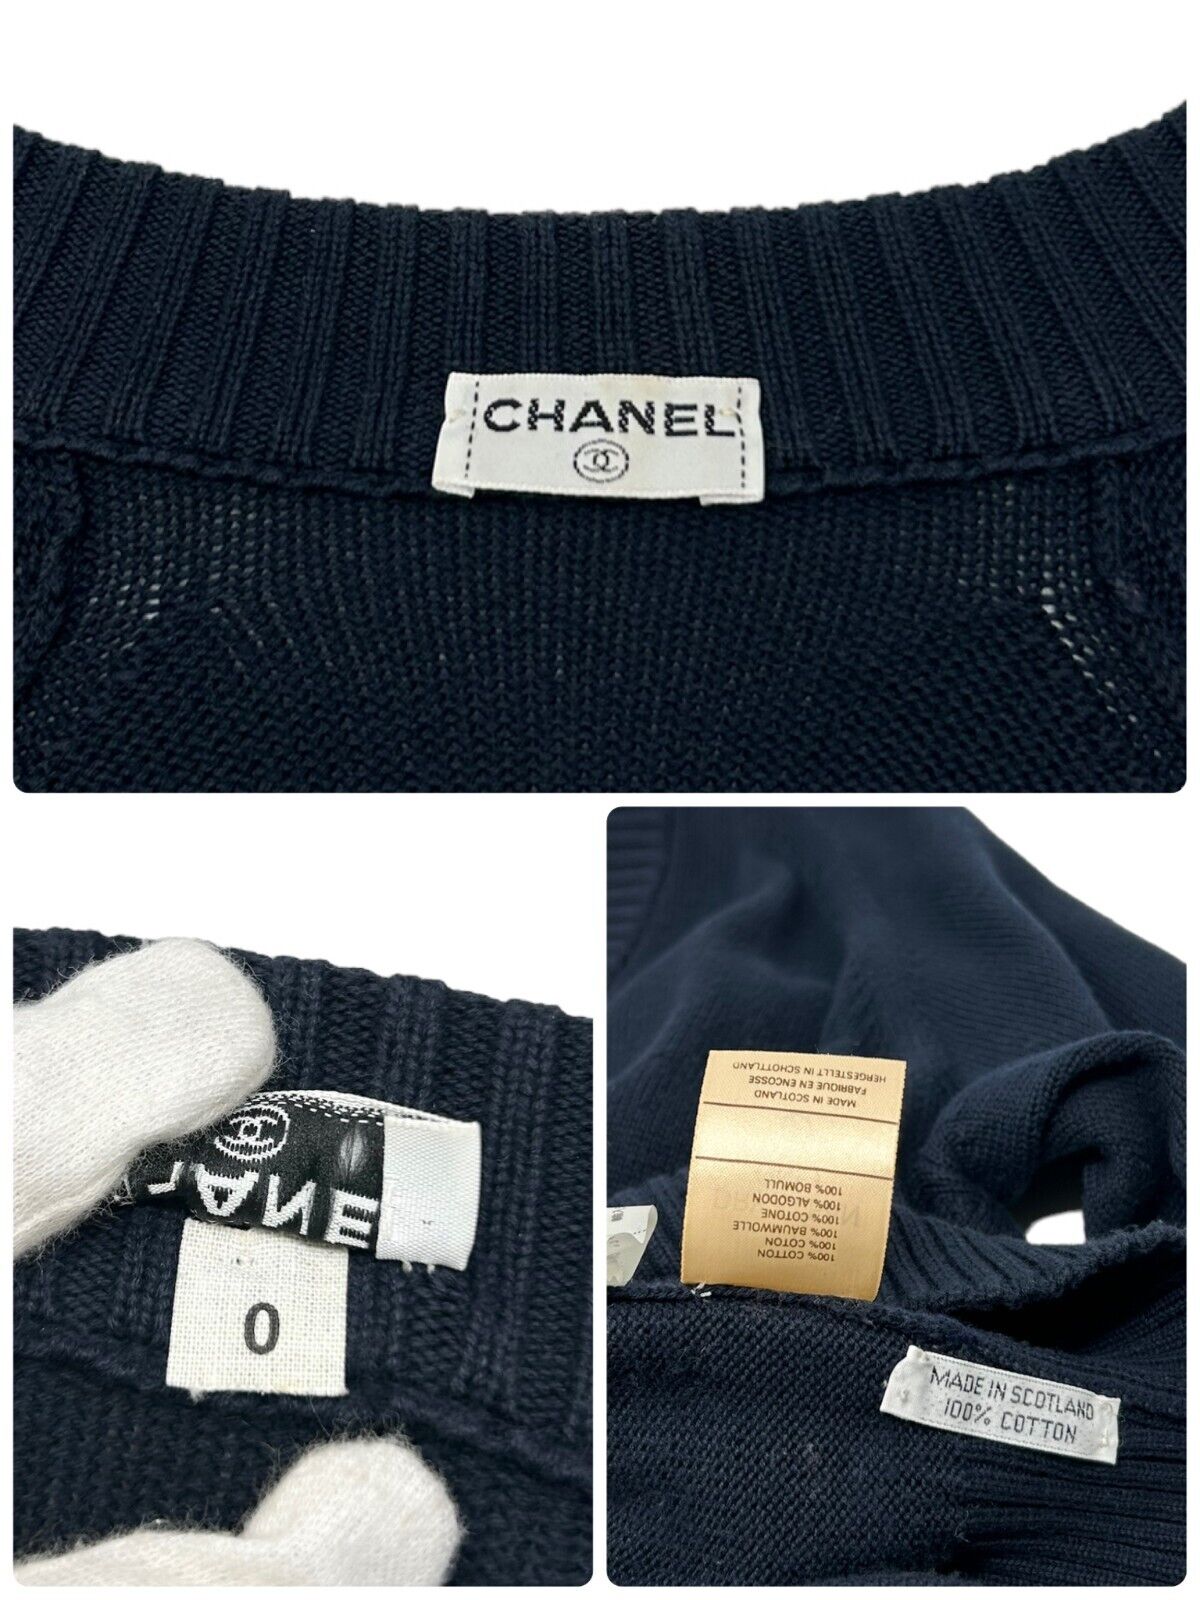 CHANEL Vintage Coco Mark Knit Sweater #0 Top Gold Button Blue Cotton Rank A